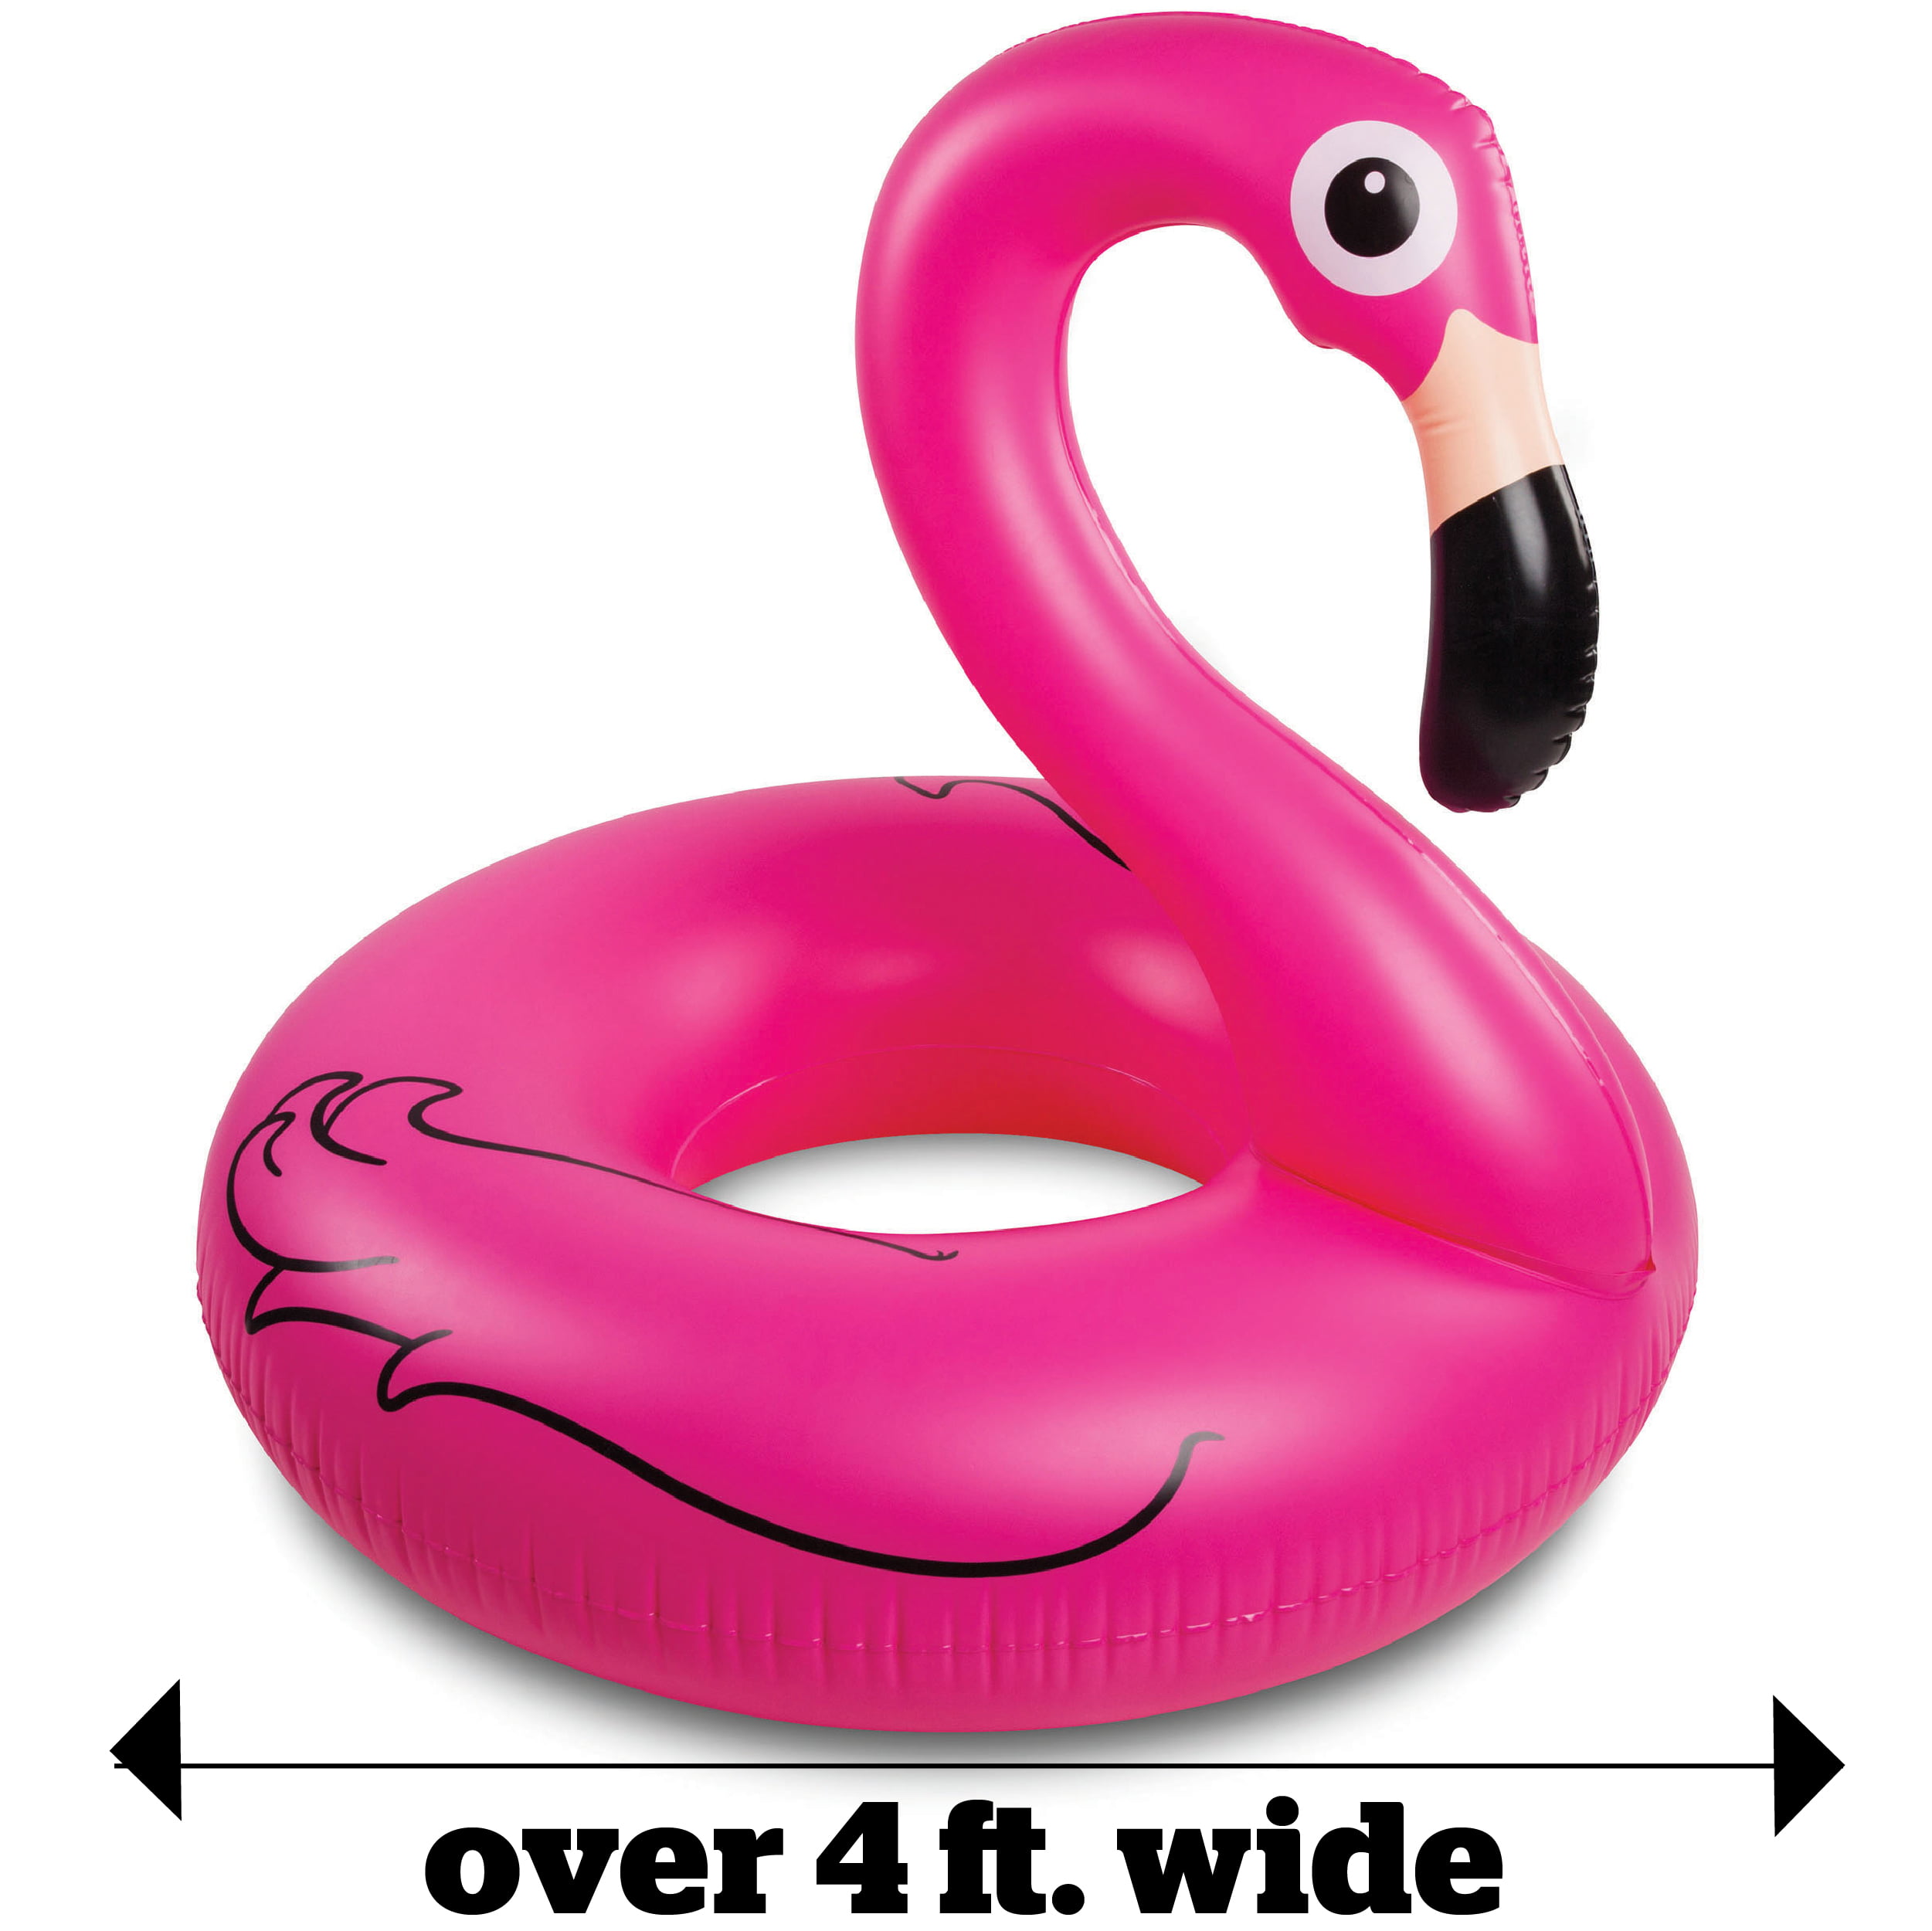 BigMouth Inc Pink Flamingo Pool Float, Inflates to Over 4ft. Wide